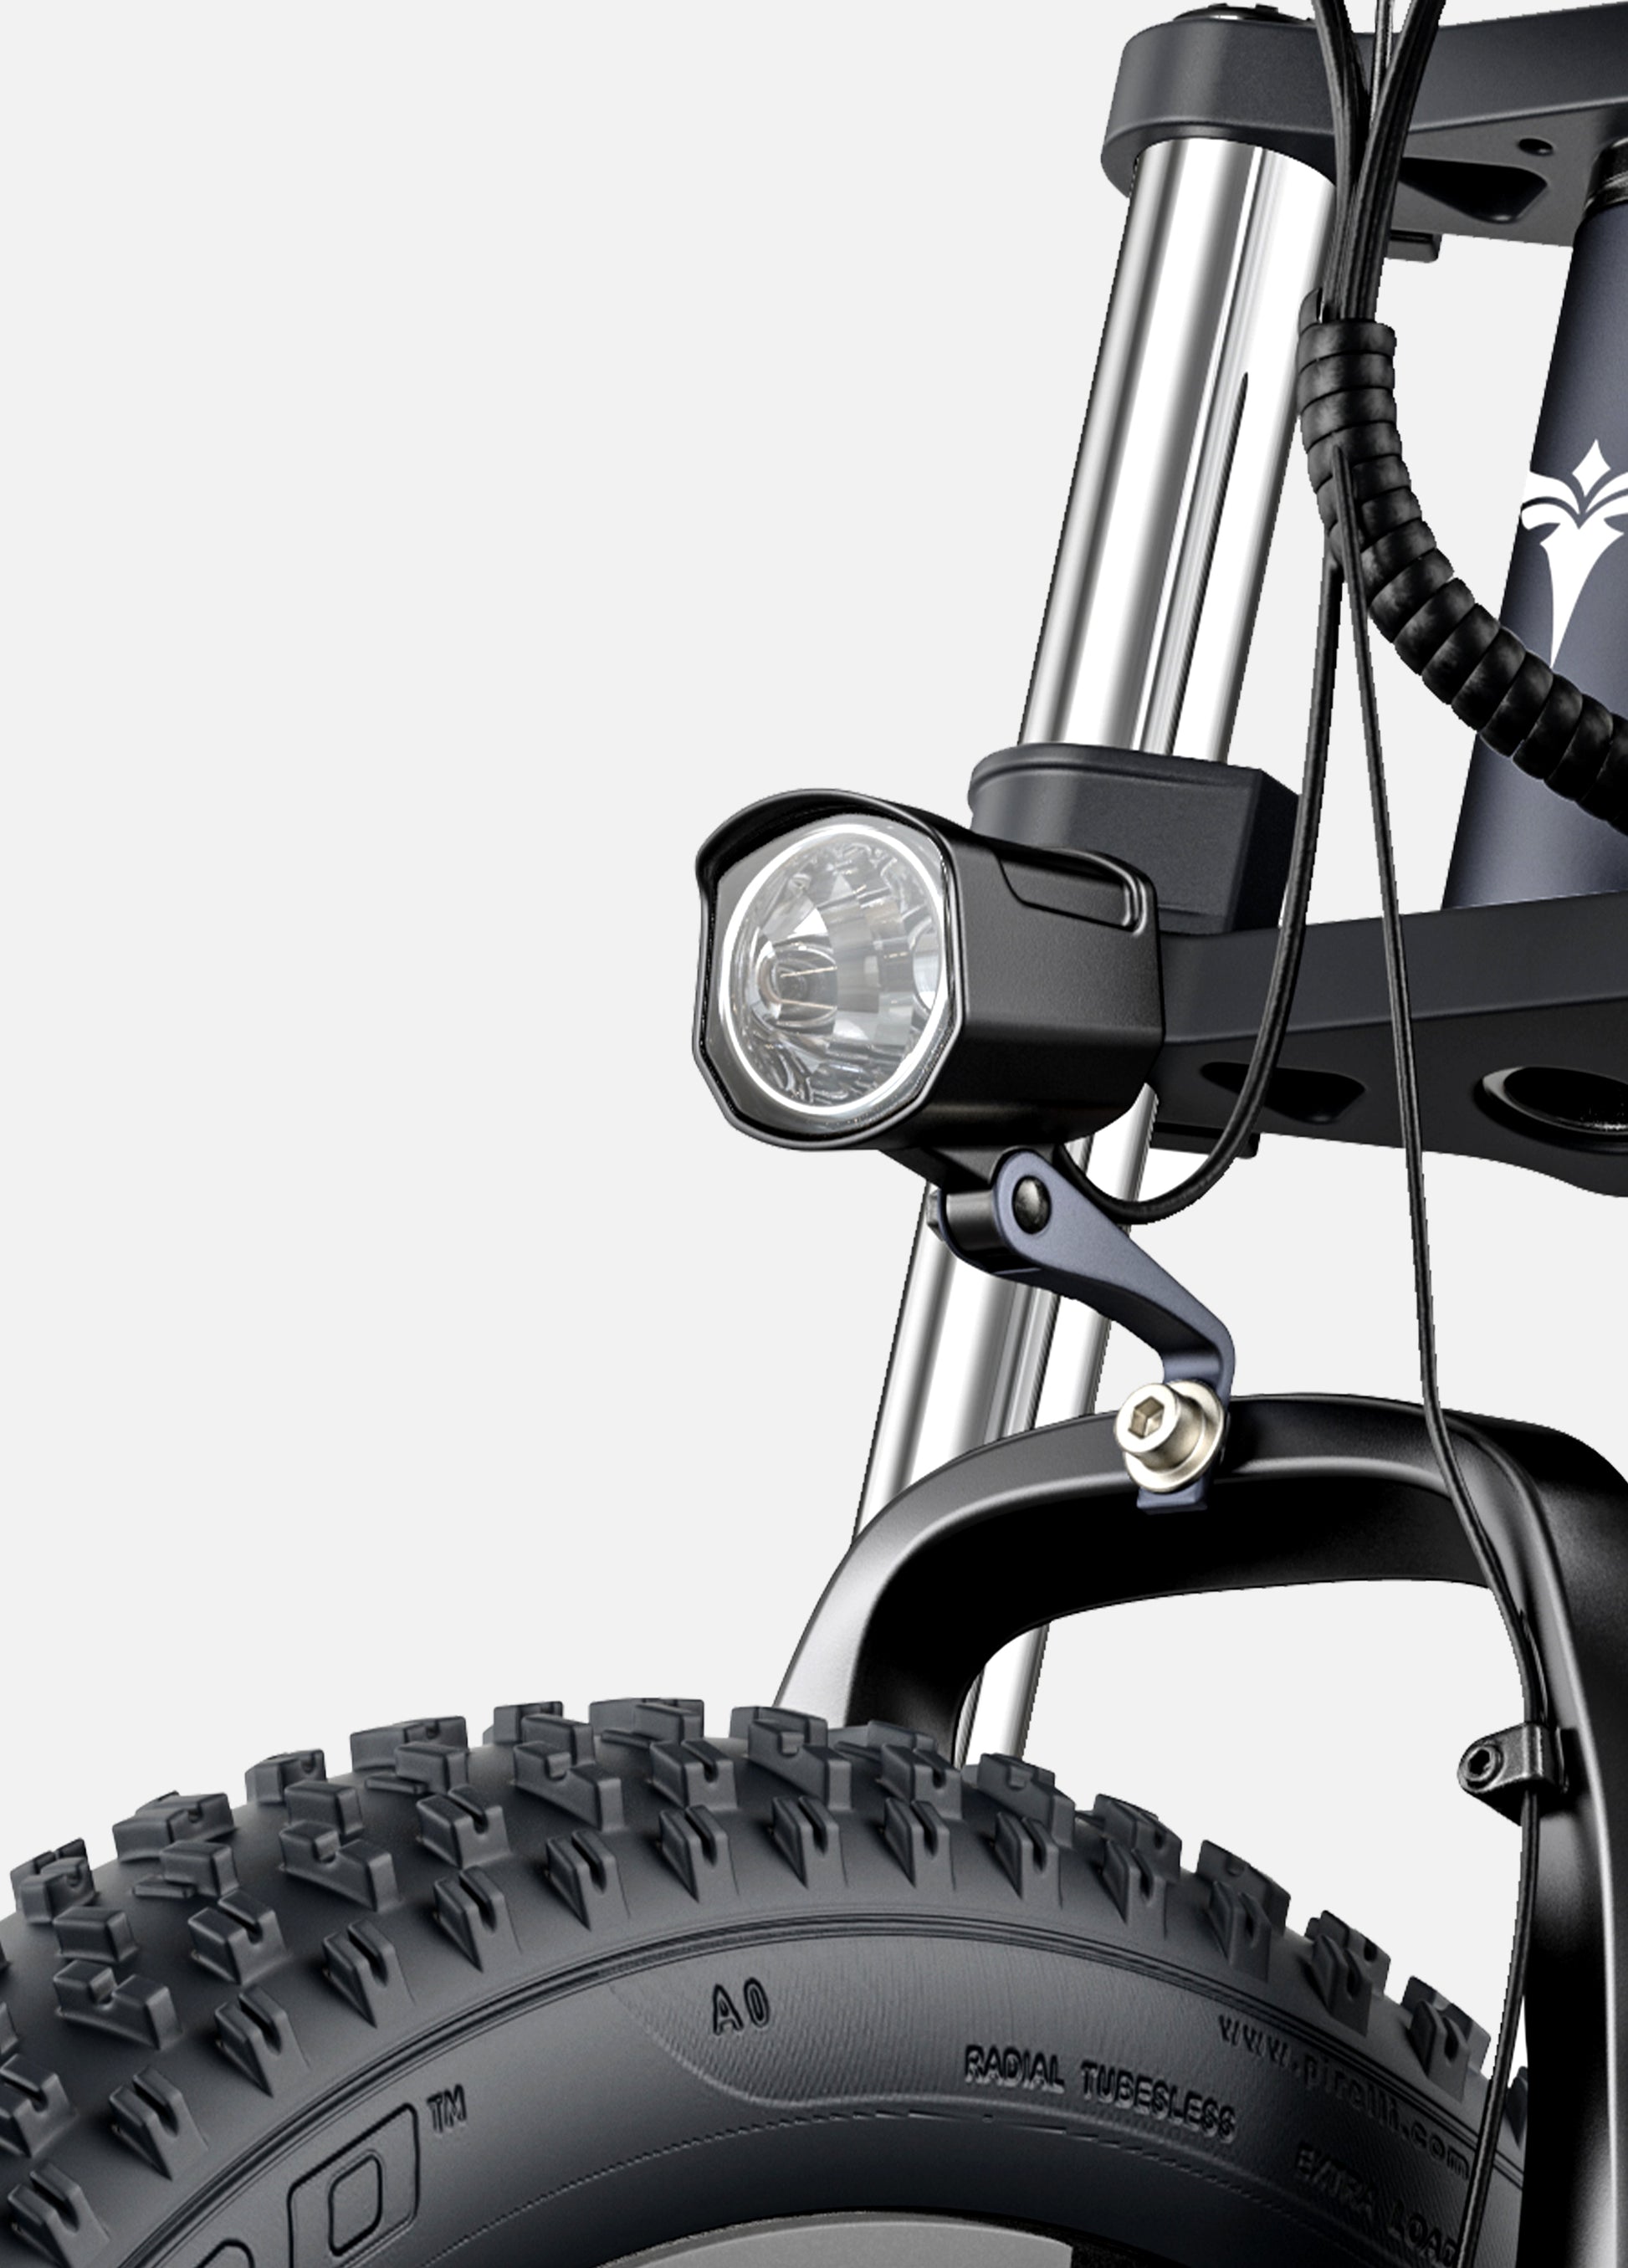 Zoomed-in view of Engwe X26 ebike's front LED headlight for increased visibility during night rides.